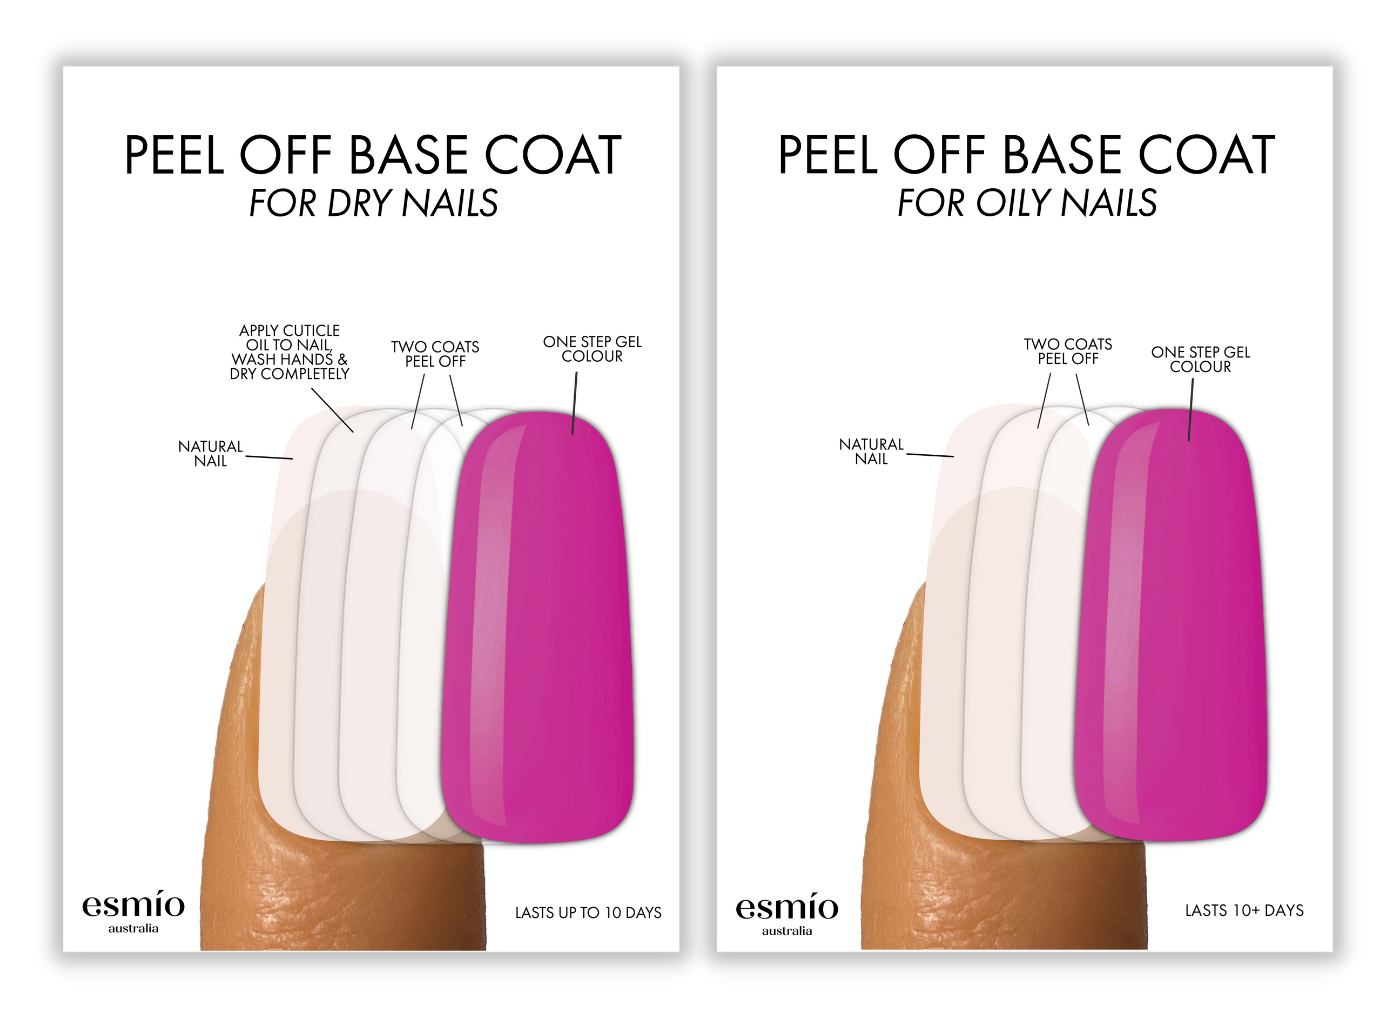 Everything you need know about the peel off base coat